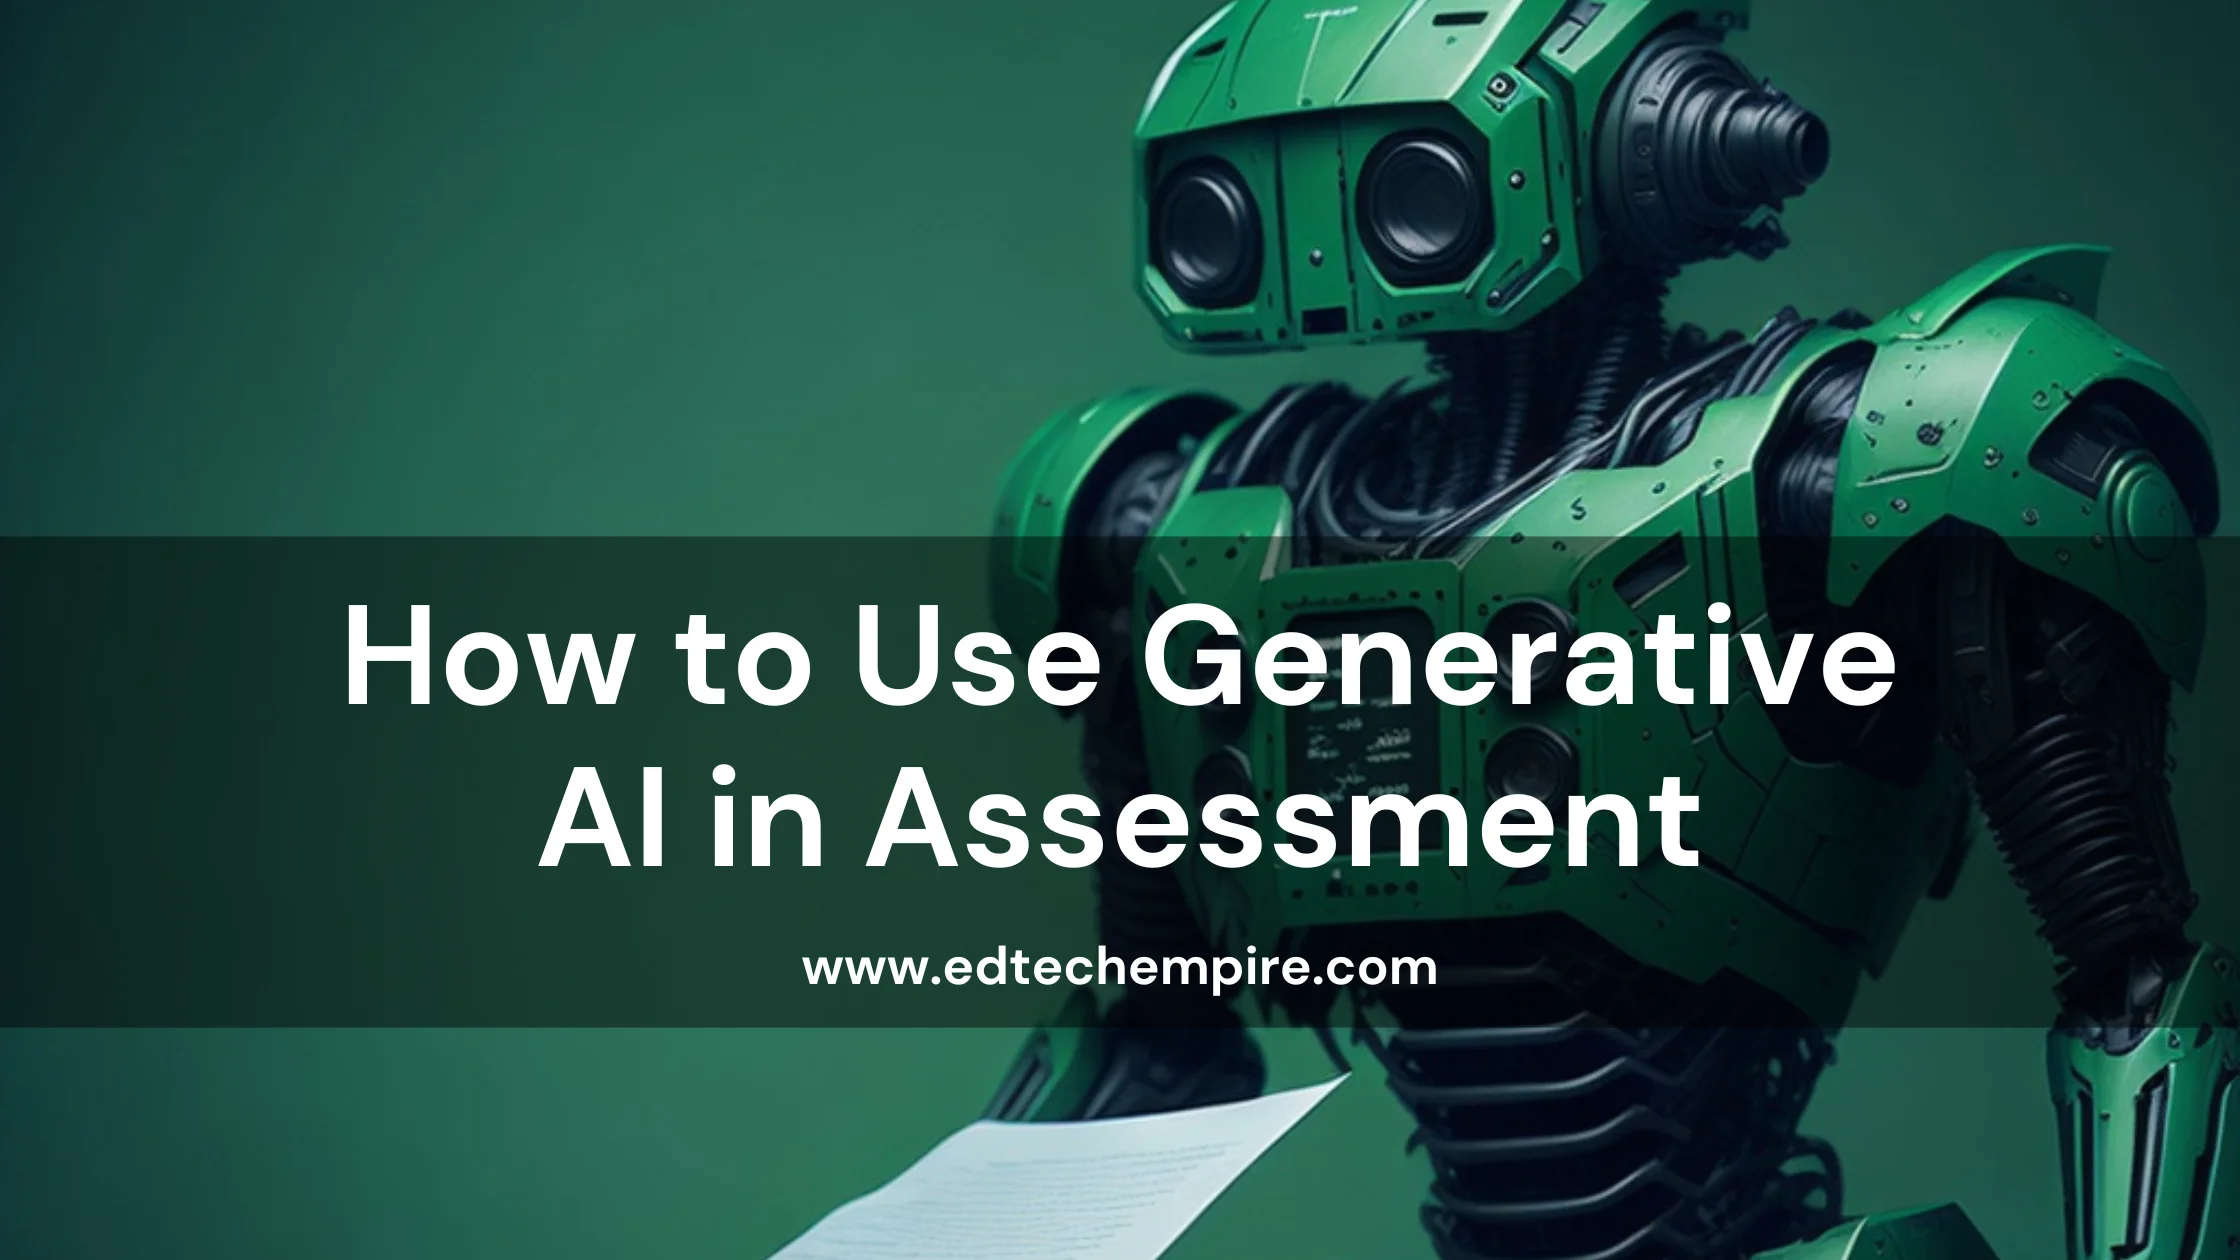 How to Use Generative AI in Assessment